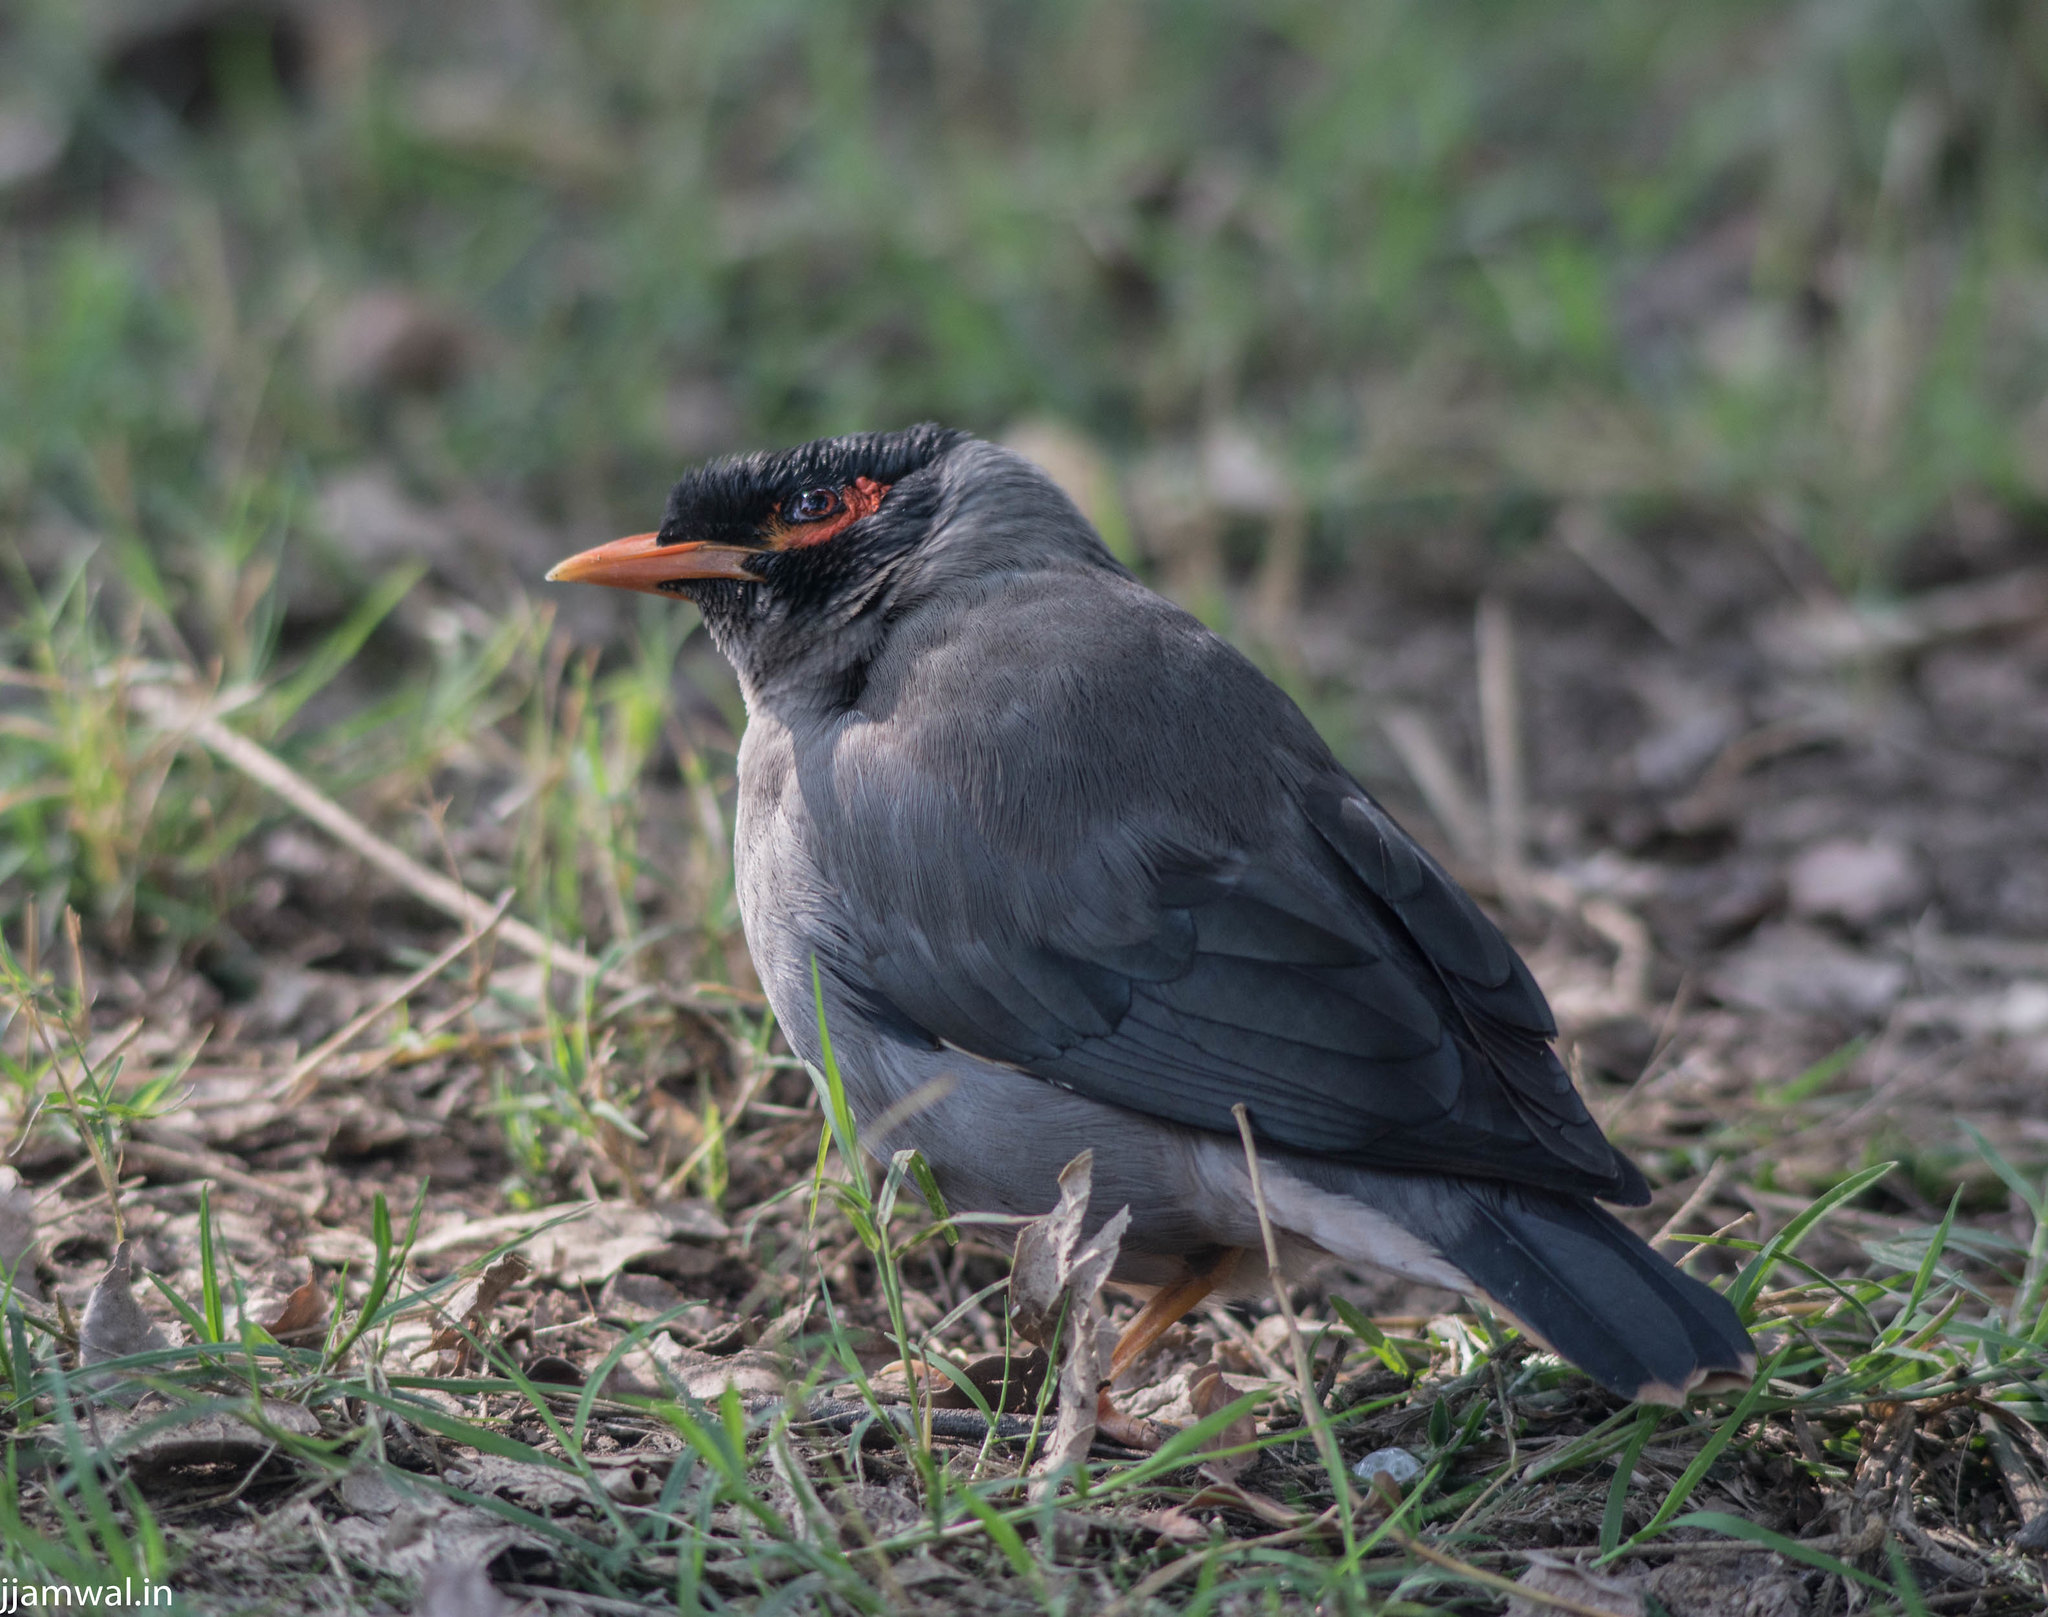 Common myna. (Acridotheres tristis) One with yellow patch behind eye is more common